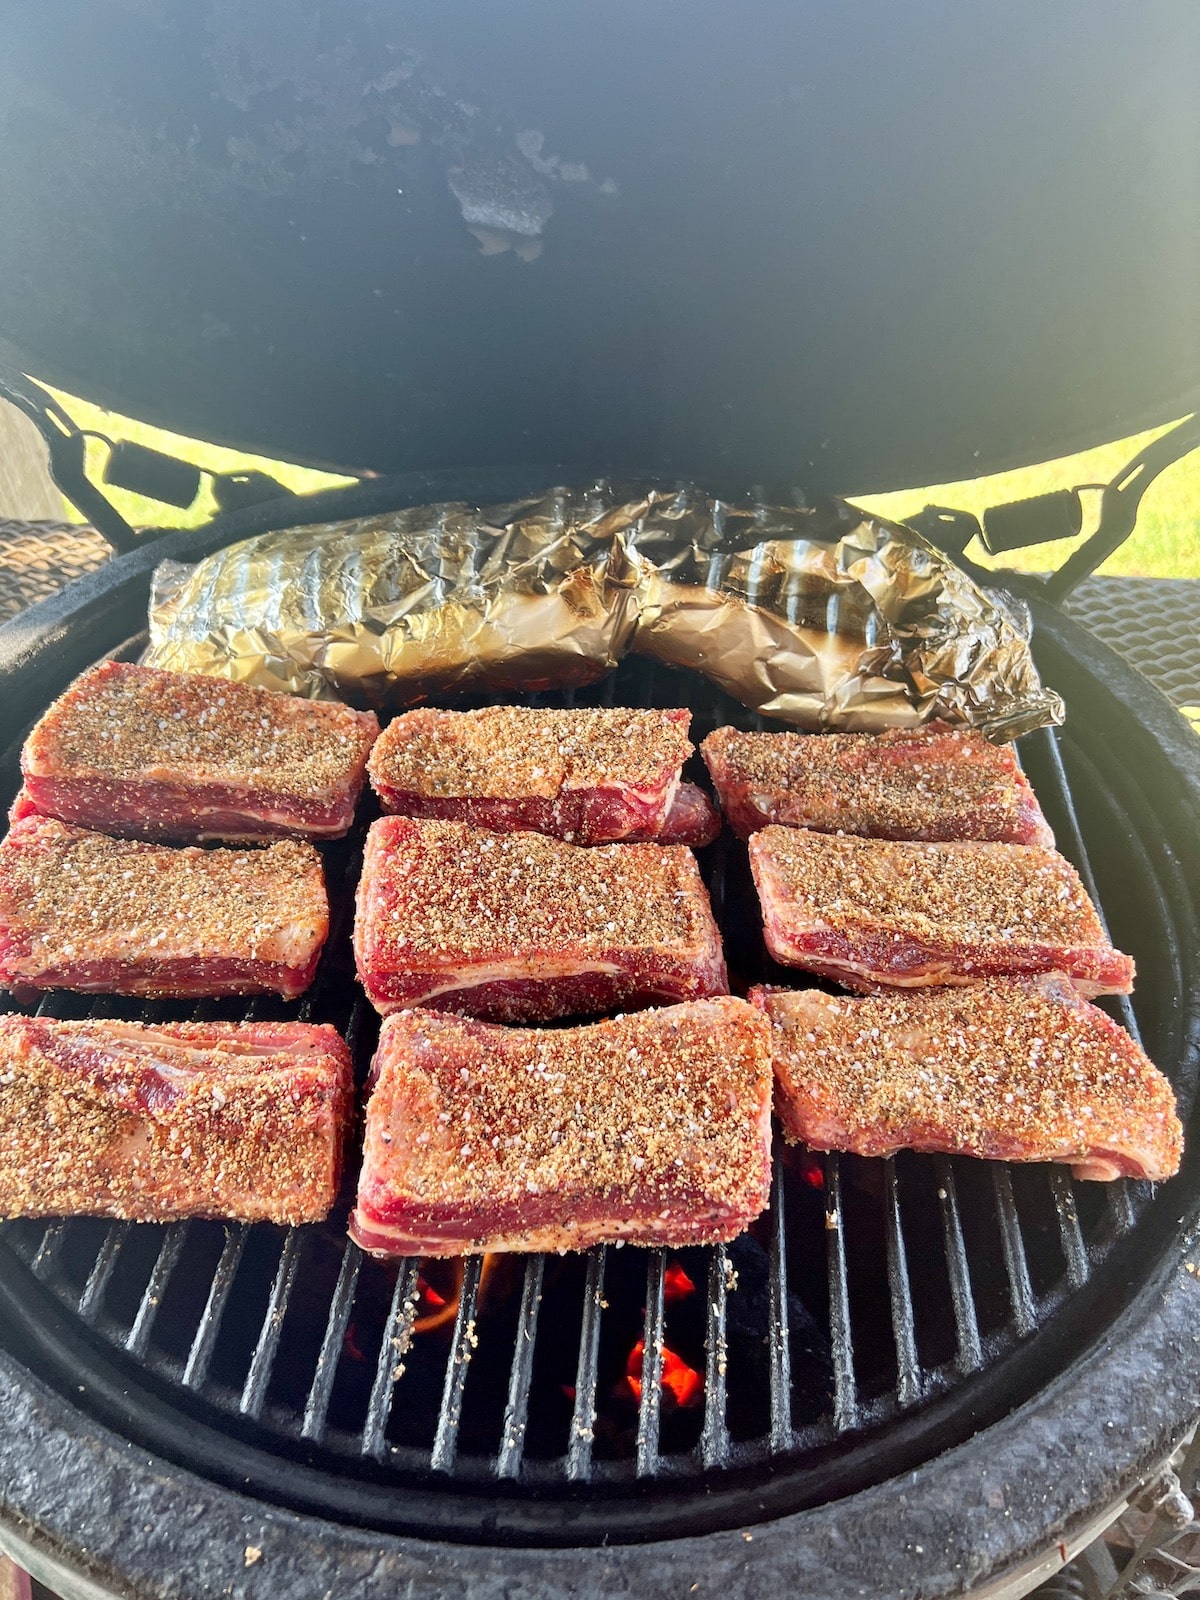 Beef ribs on a grill.